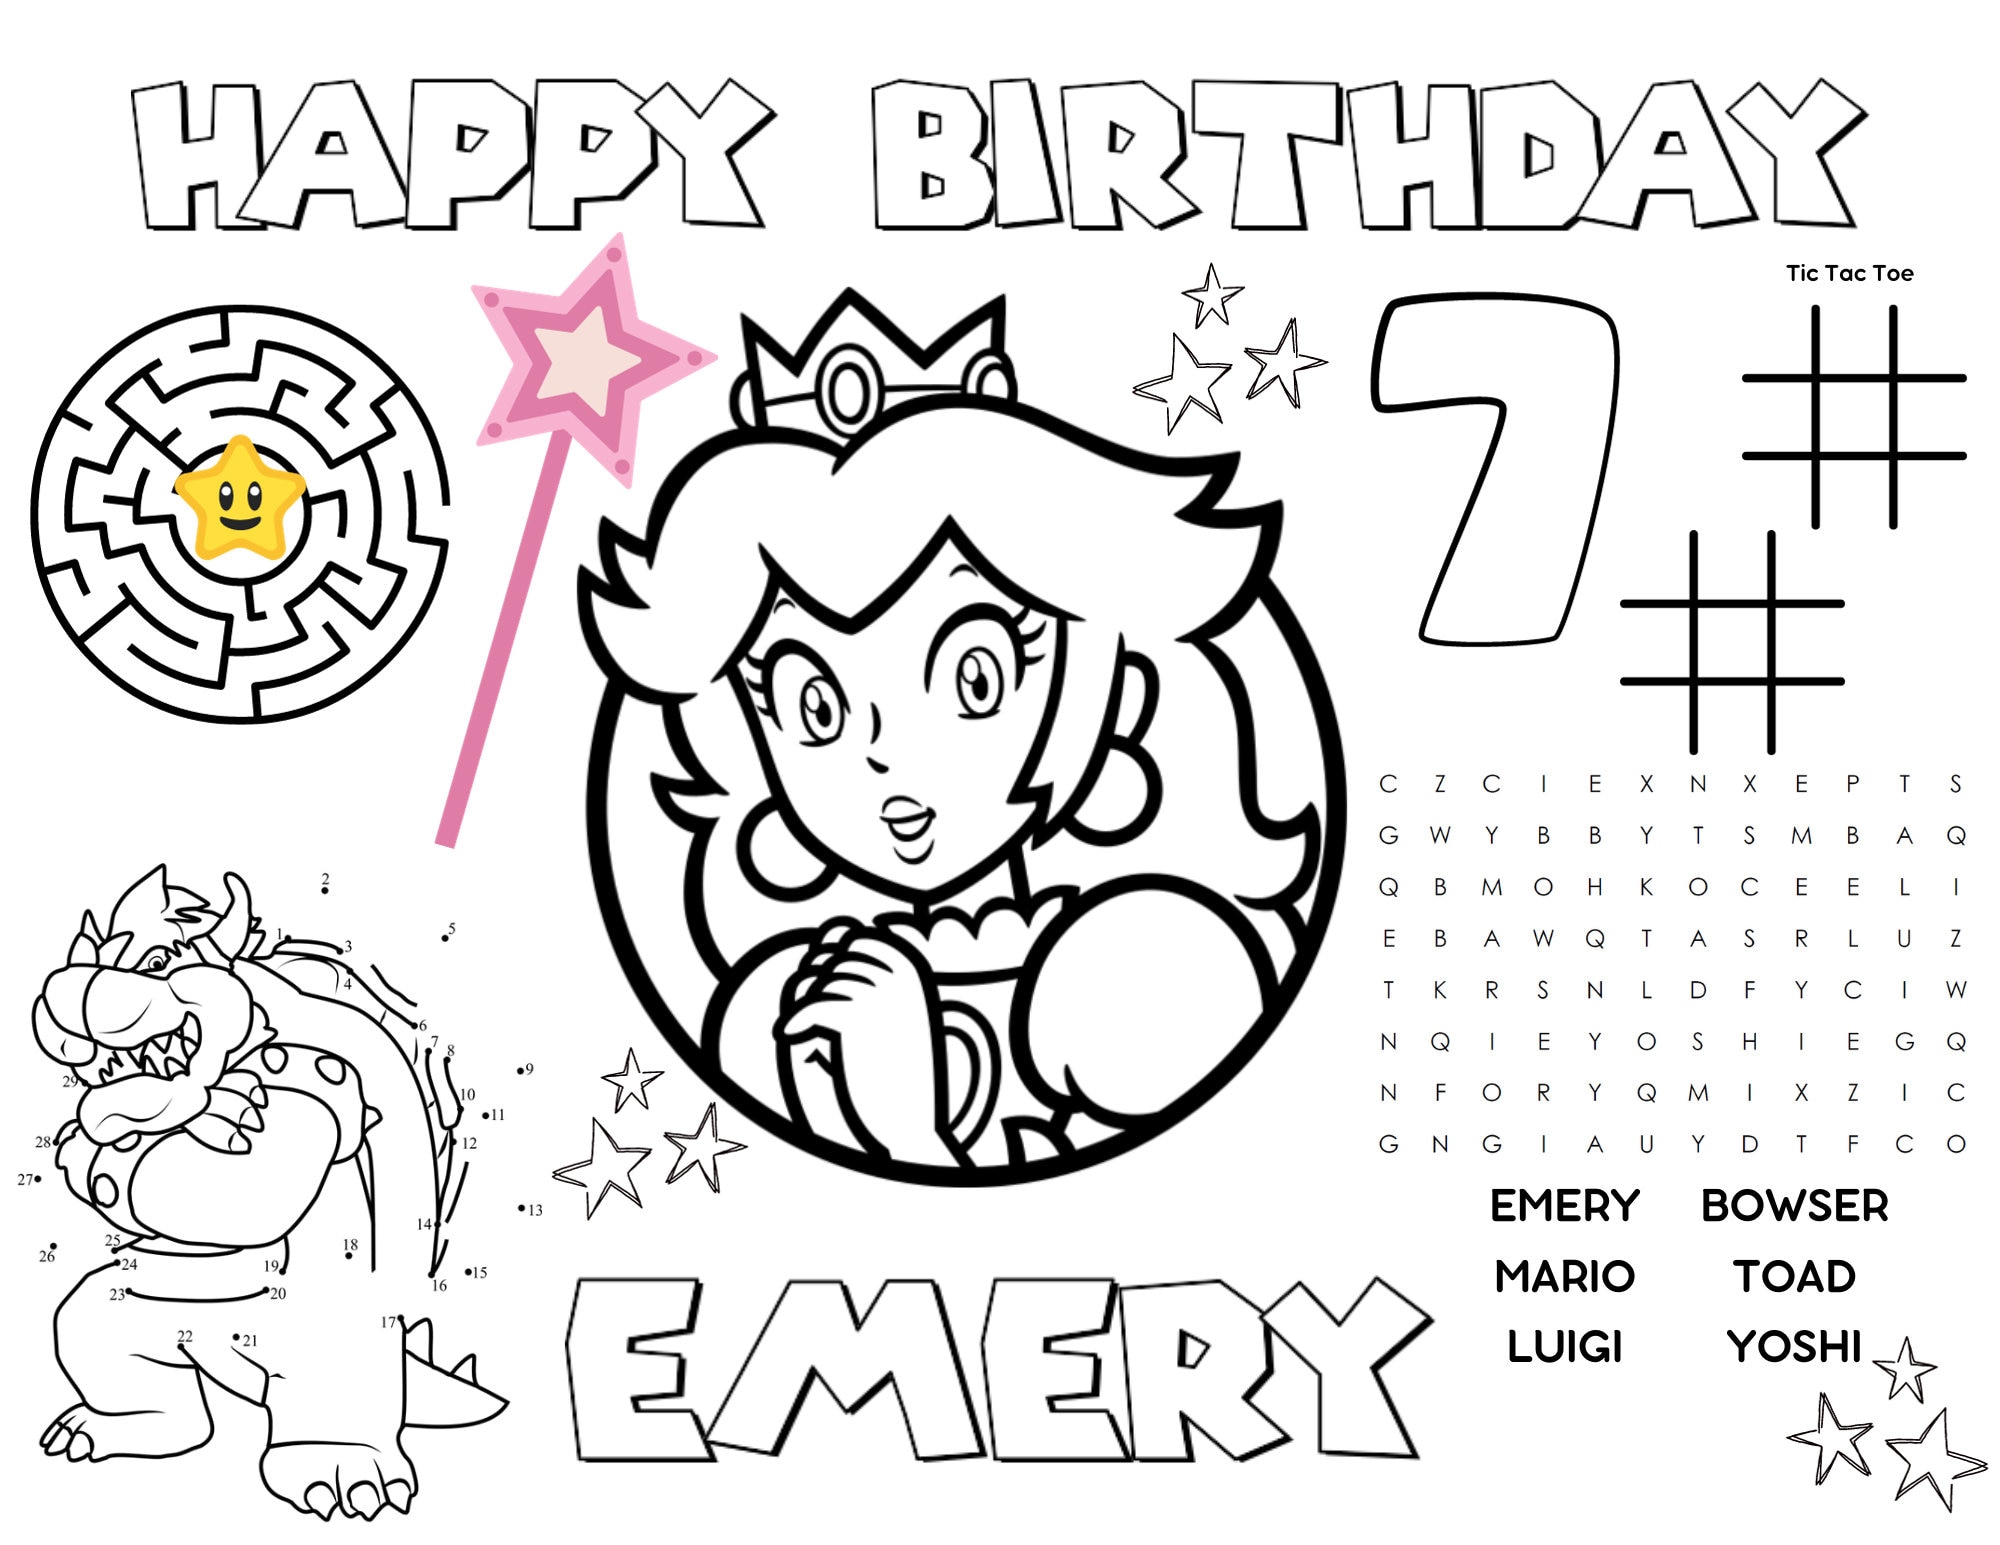 Princess peach super mario party coloring activity sheet placemat kids birthday party